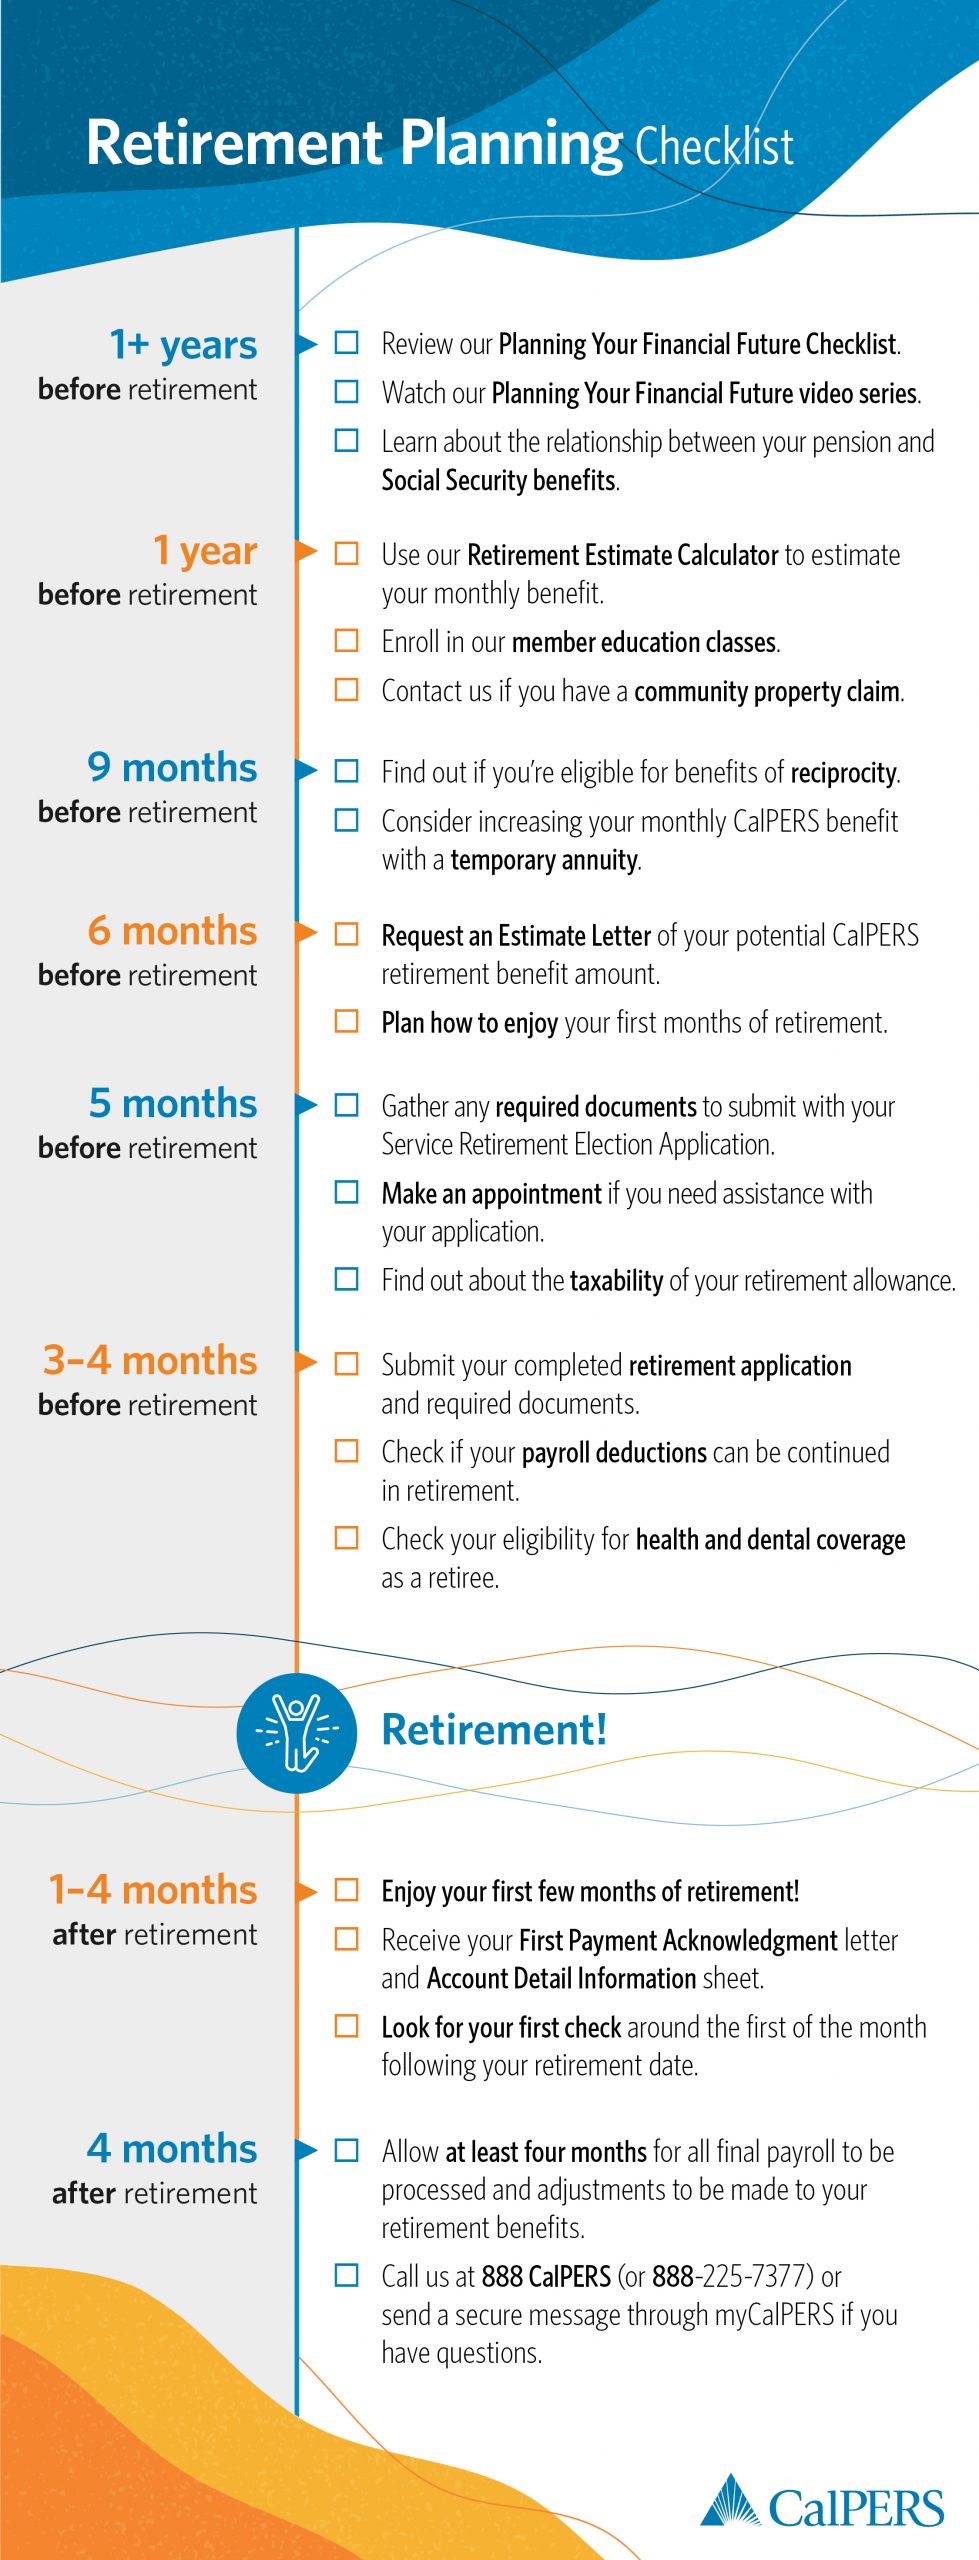 An infographic listing the recommended steps to plan and prepare for retirement, from one year in advance to four months after retirement. 